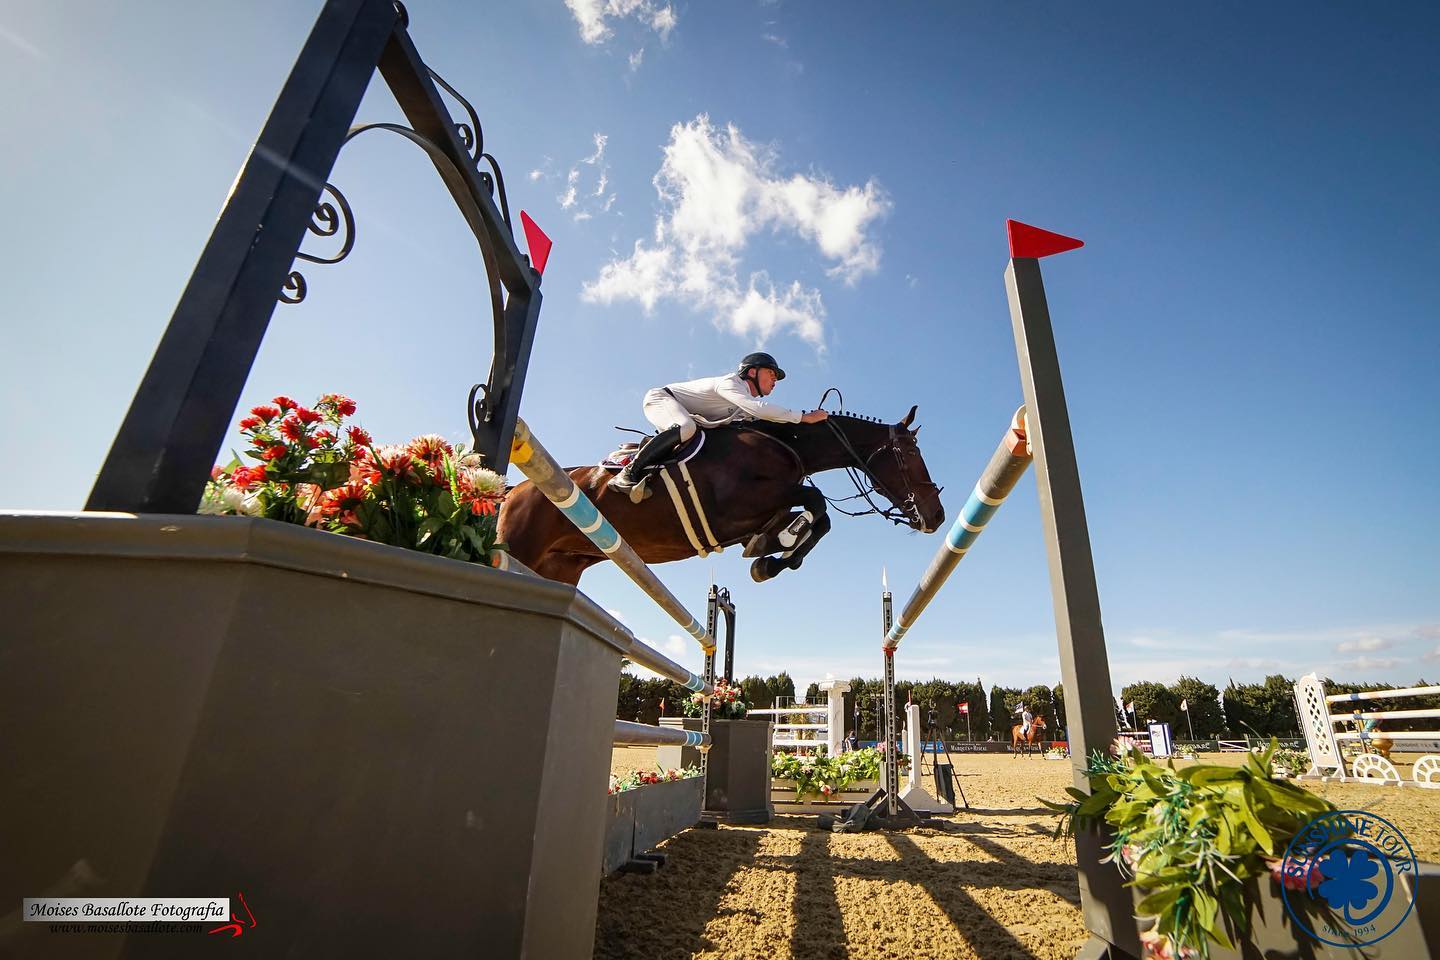 Michael Pender takes Vejer CSI4* Grand Prix as only faultless rider!